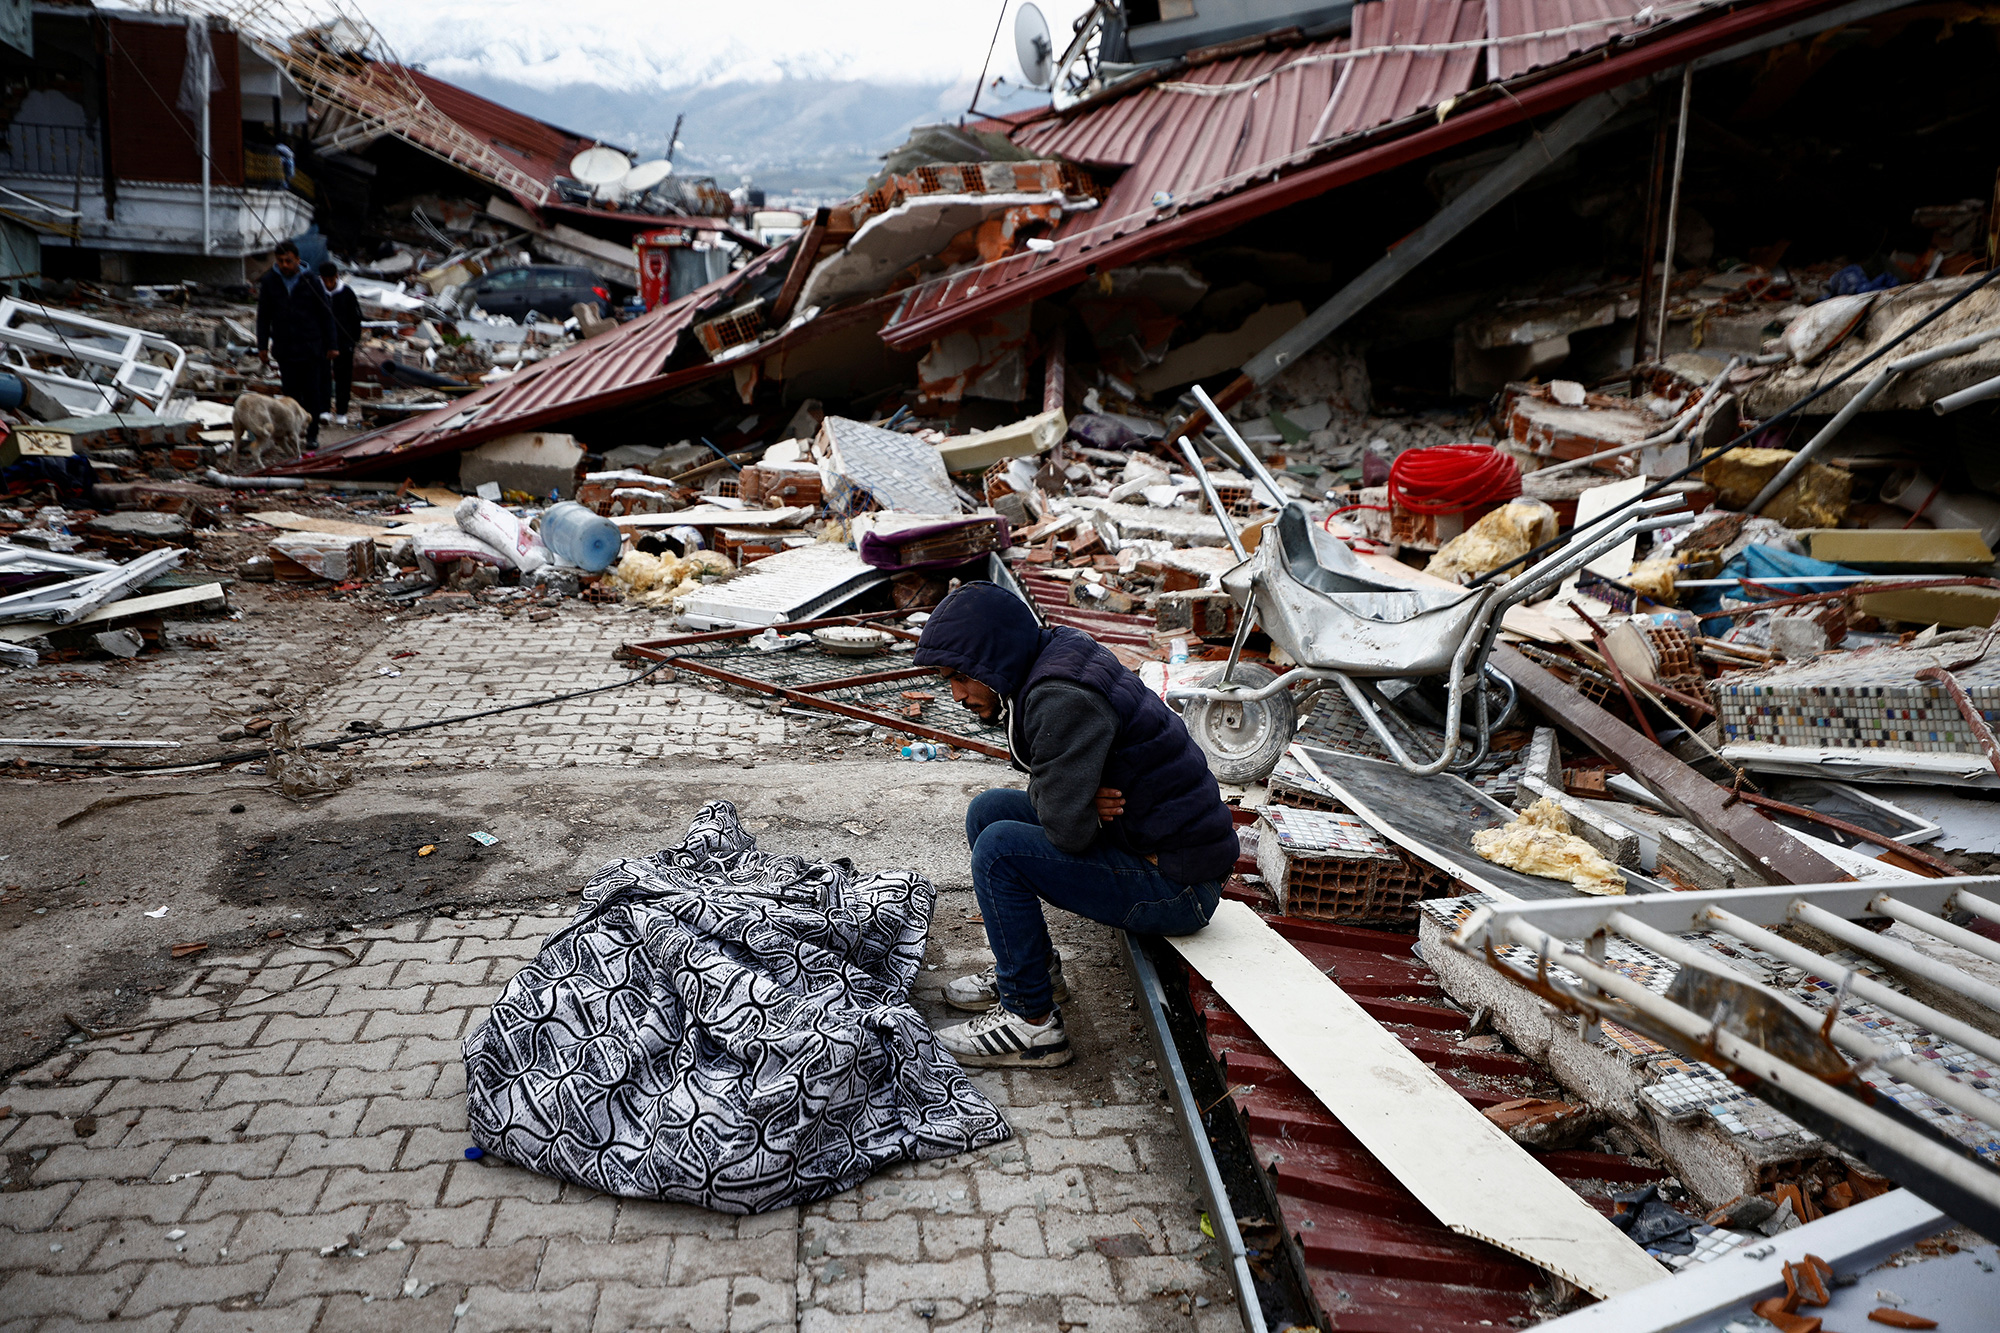 A man sits next to the body of a loved one covered with a blanket at the site of a collapsed building in Hatay, Turkey.